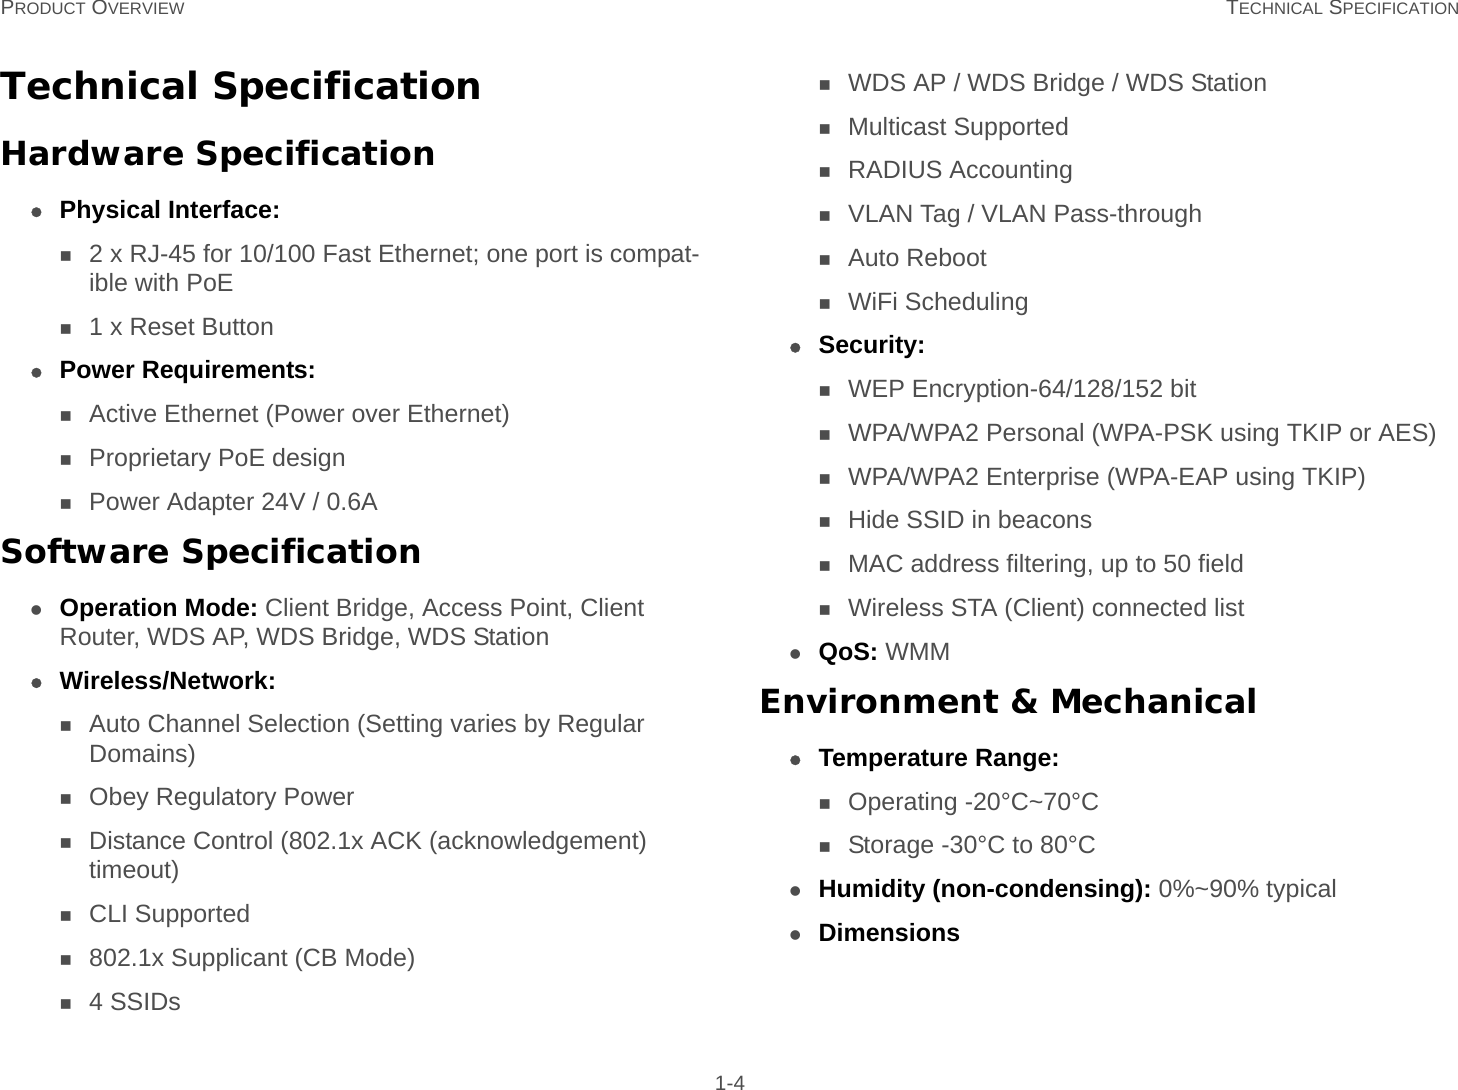 PRODUCT OVERVIEW TECHNICAL SPECIFICATION 1-4Technical SpecificationHardware SpecificationPhysical Interface:2 x RJ-45 for 10/100 Fast Ethernet; one port is compat-ible with PoE1 x Reset ButtonPower Requirements:Active Ethernet (Power over Ethernet)Proprietary PoE designPower Adapter 24V / 0.6ASoftware SpecificationOperation Mode: Client Bridge, Access Point, Client Router, WDS AP, WDS Bridge, WDS StationWireless/Network:Auto Channel Selection (Setting varies by Regular Domains)Obey Regulatory PowerDistance Control (802.1x ACK (acknowledgement) timeout)CLI Supported802.1x Supplicant (CB Mode)4 SSIDsWDS AP / WDS Bridge / WDS StationMulticast SupportedRADIUS AccountingVLAN Tag / VLAN Pass-throughAuto RebootWiFi SchedulingSecurity:WEP Encryption-64/128/152 bitWPA/WPA2 Personal (WPA-PSK using TKIP or AES)WPA/WPA2 Enterprise (WPA-EAP using TKIP)Hide SSID in beaconsMAC address filtering, up to 50 fieldWireless STA (Client) connected listQoS: WMMEnvironment &amp; MechanicalTemperature Range:Operating -20°C~70°CStorage -30°C to 80°CHumidity (non-condensing): 0%~90% typicalDimensions 